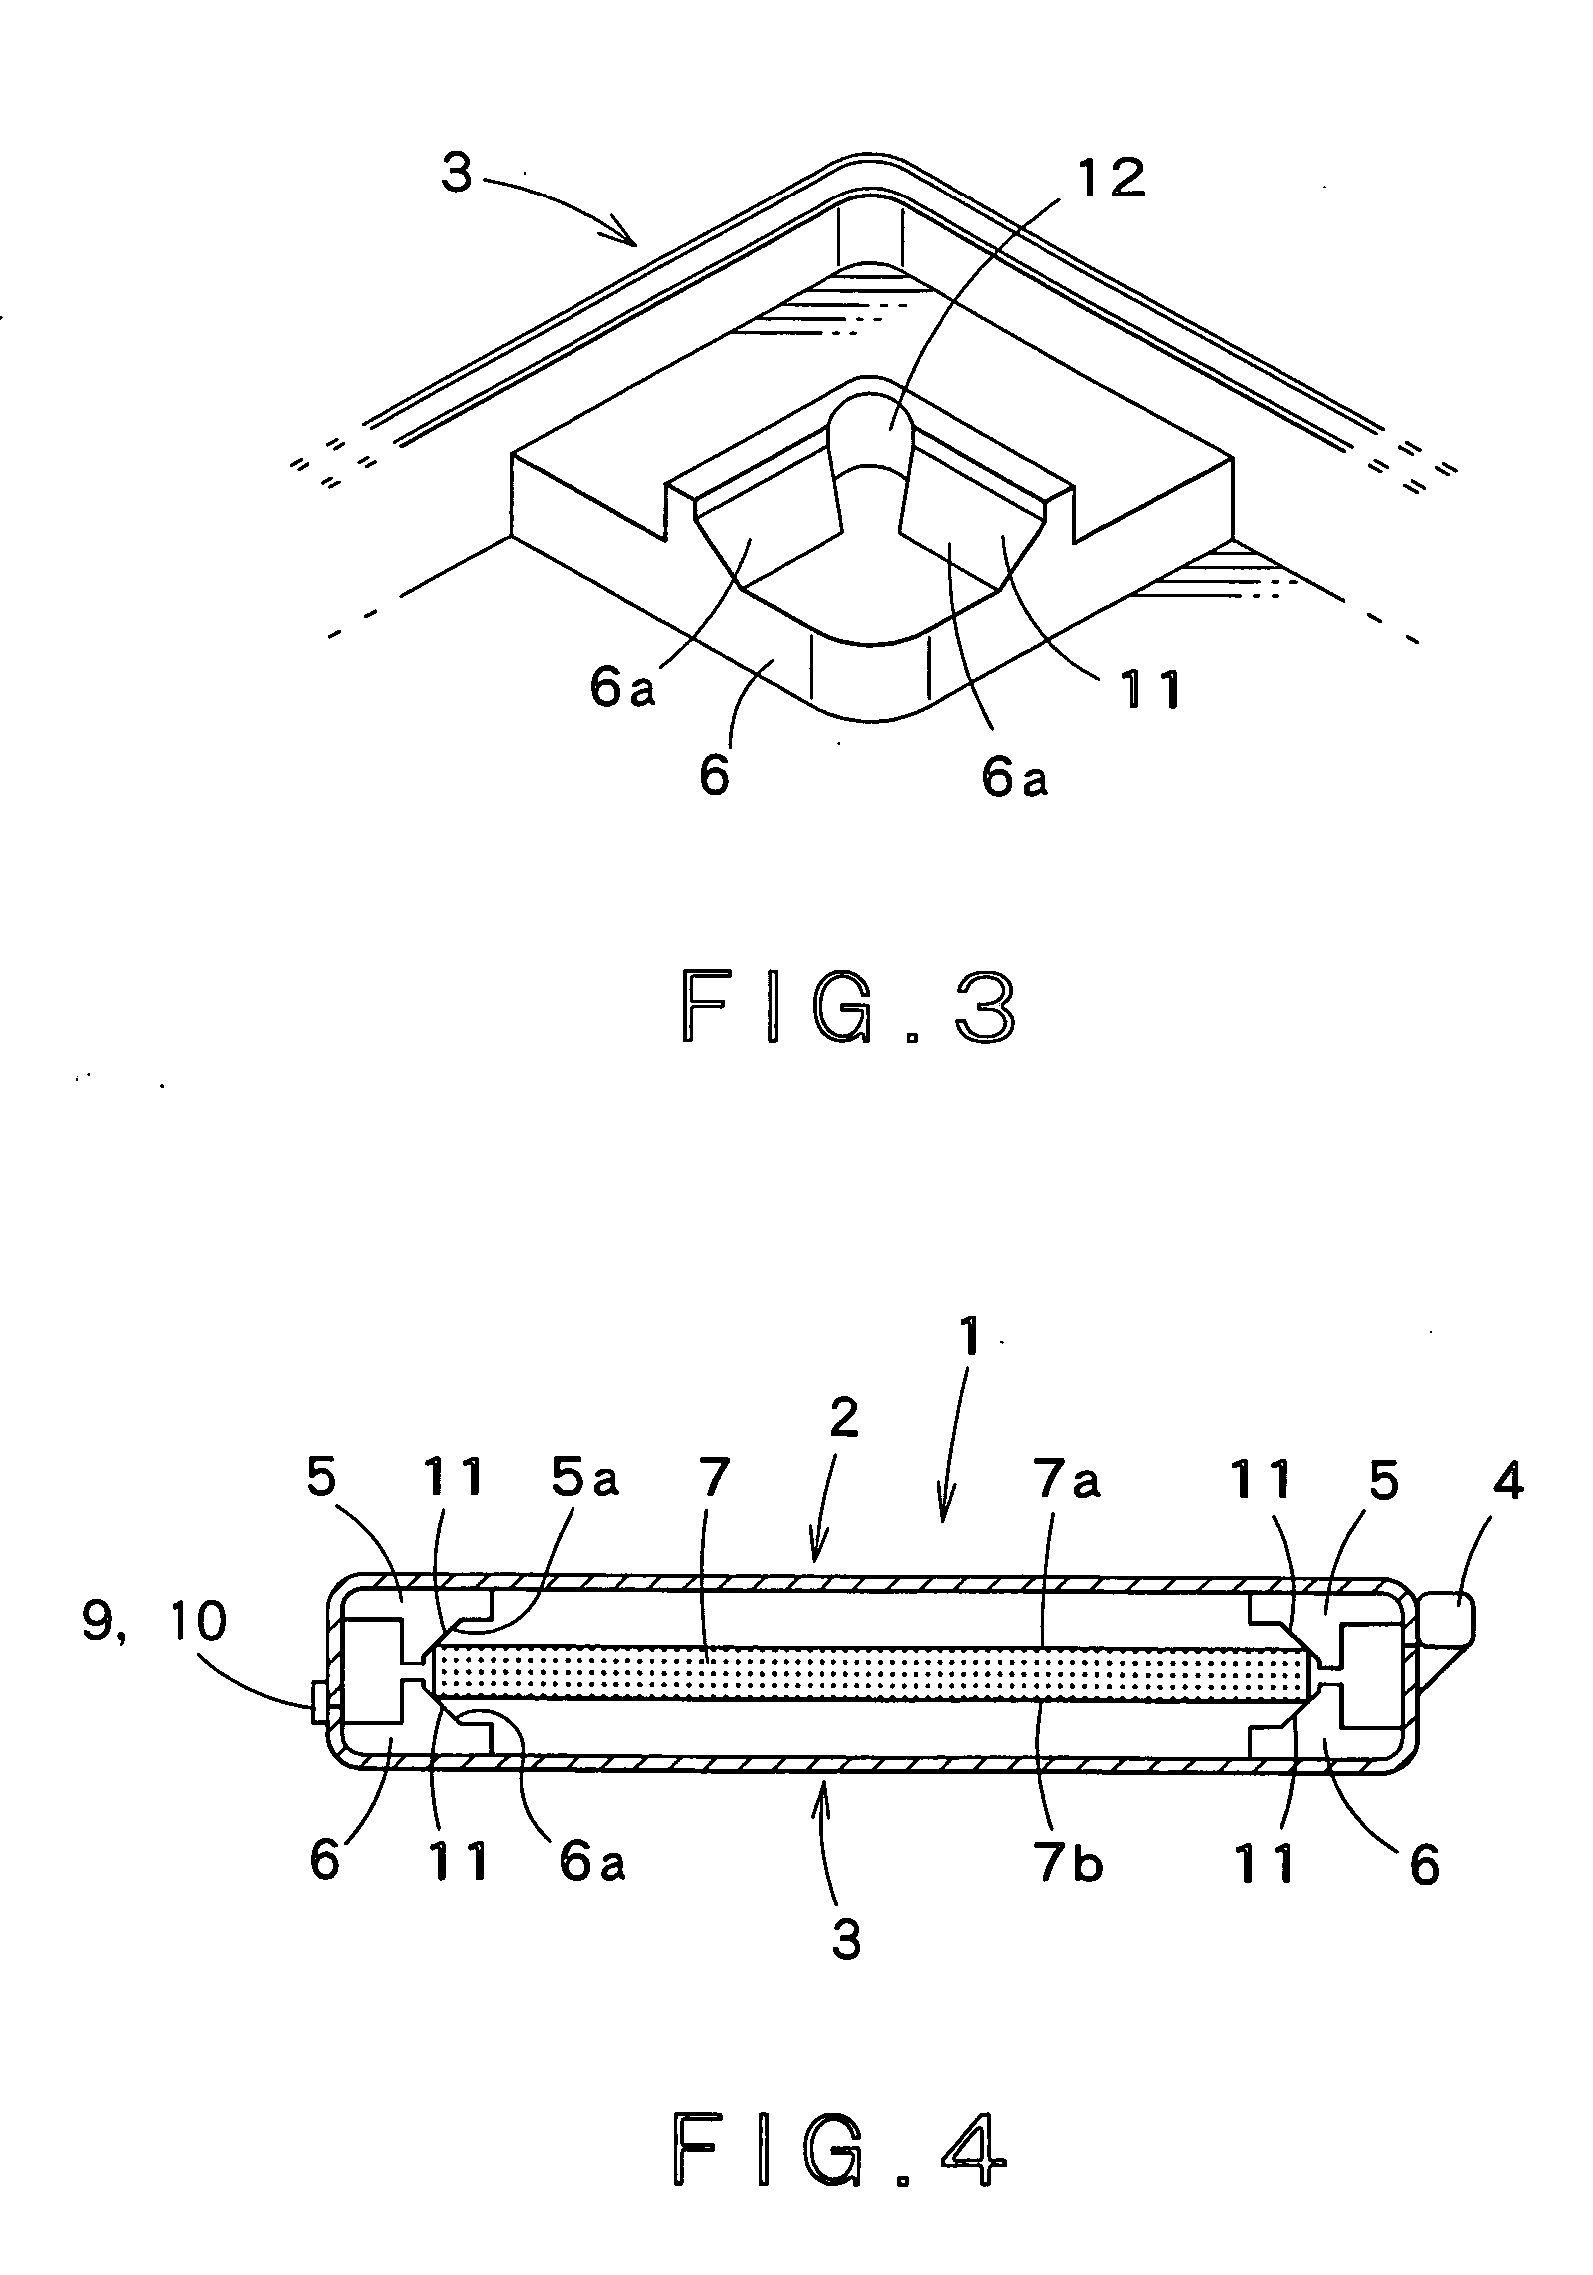 Substrate containing case